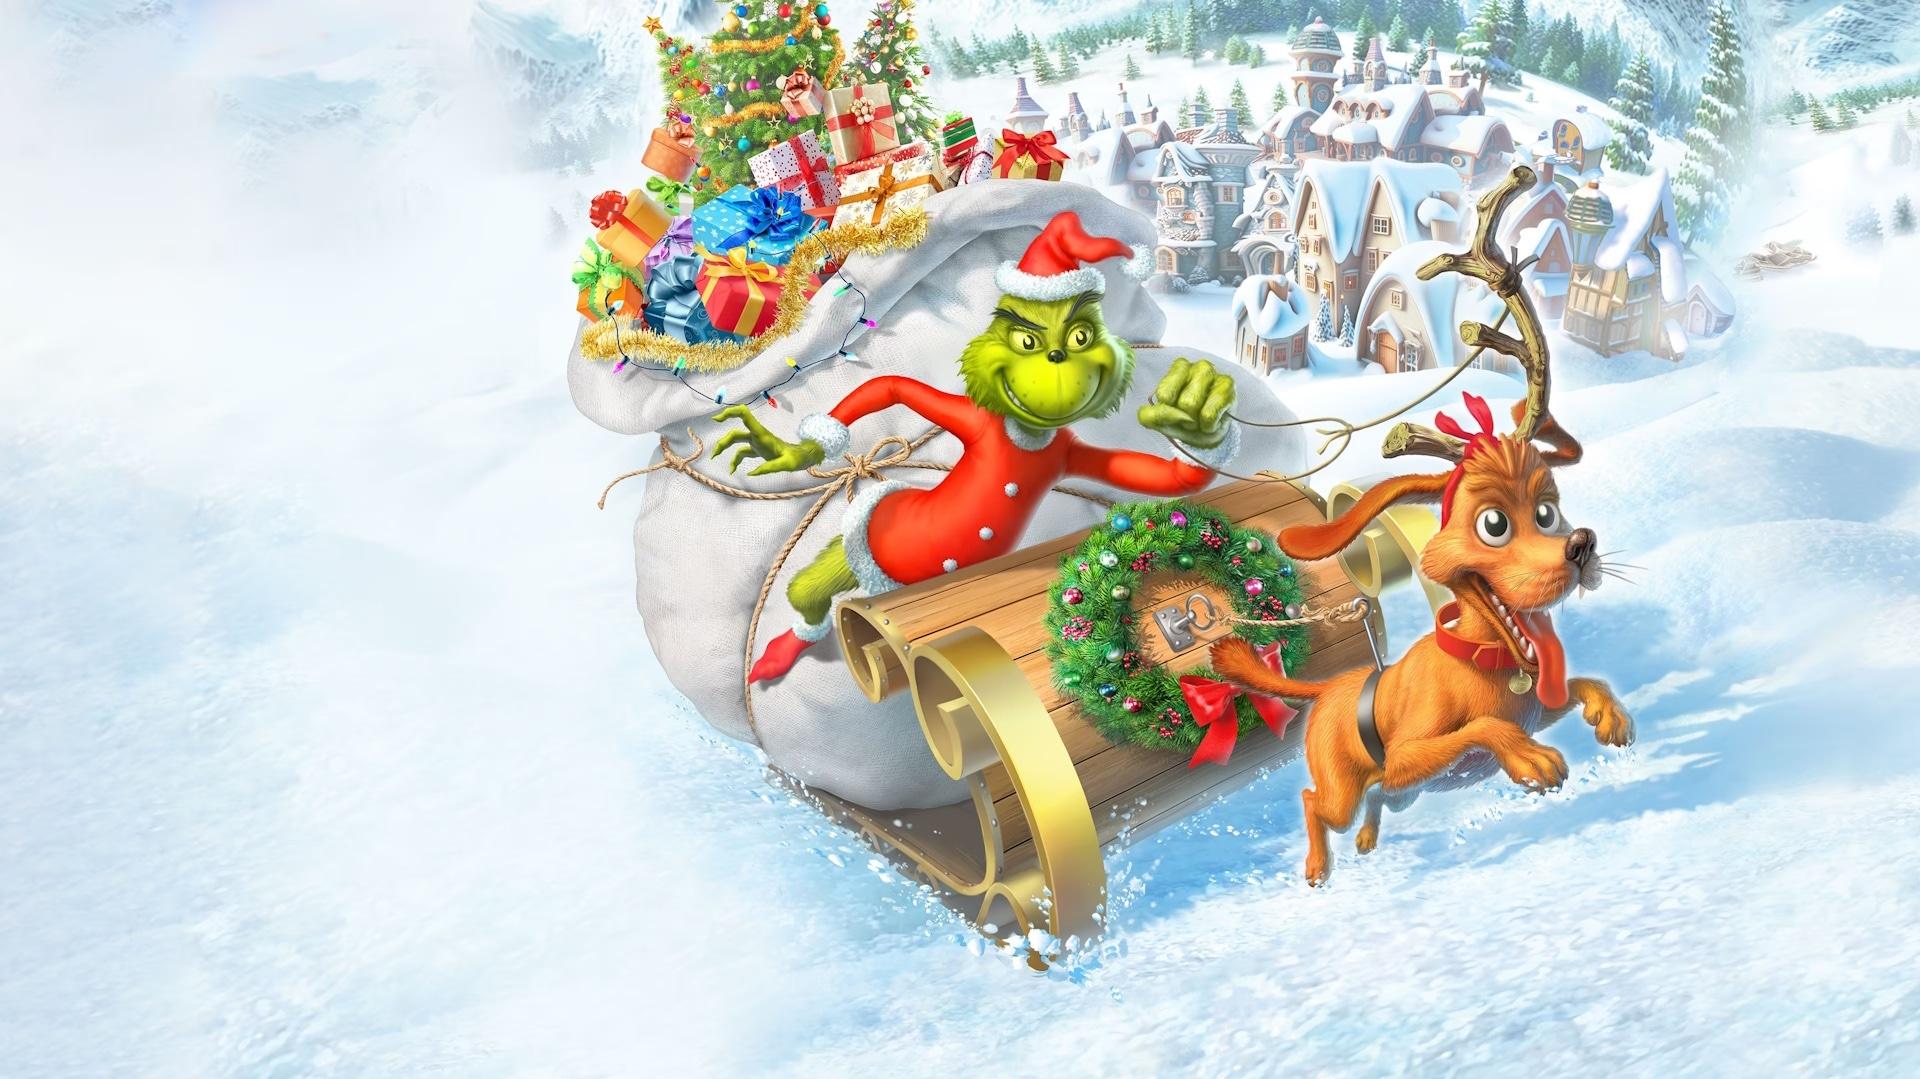 The Grinch Christmas Adventures PlayStation trophy list revealed